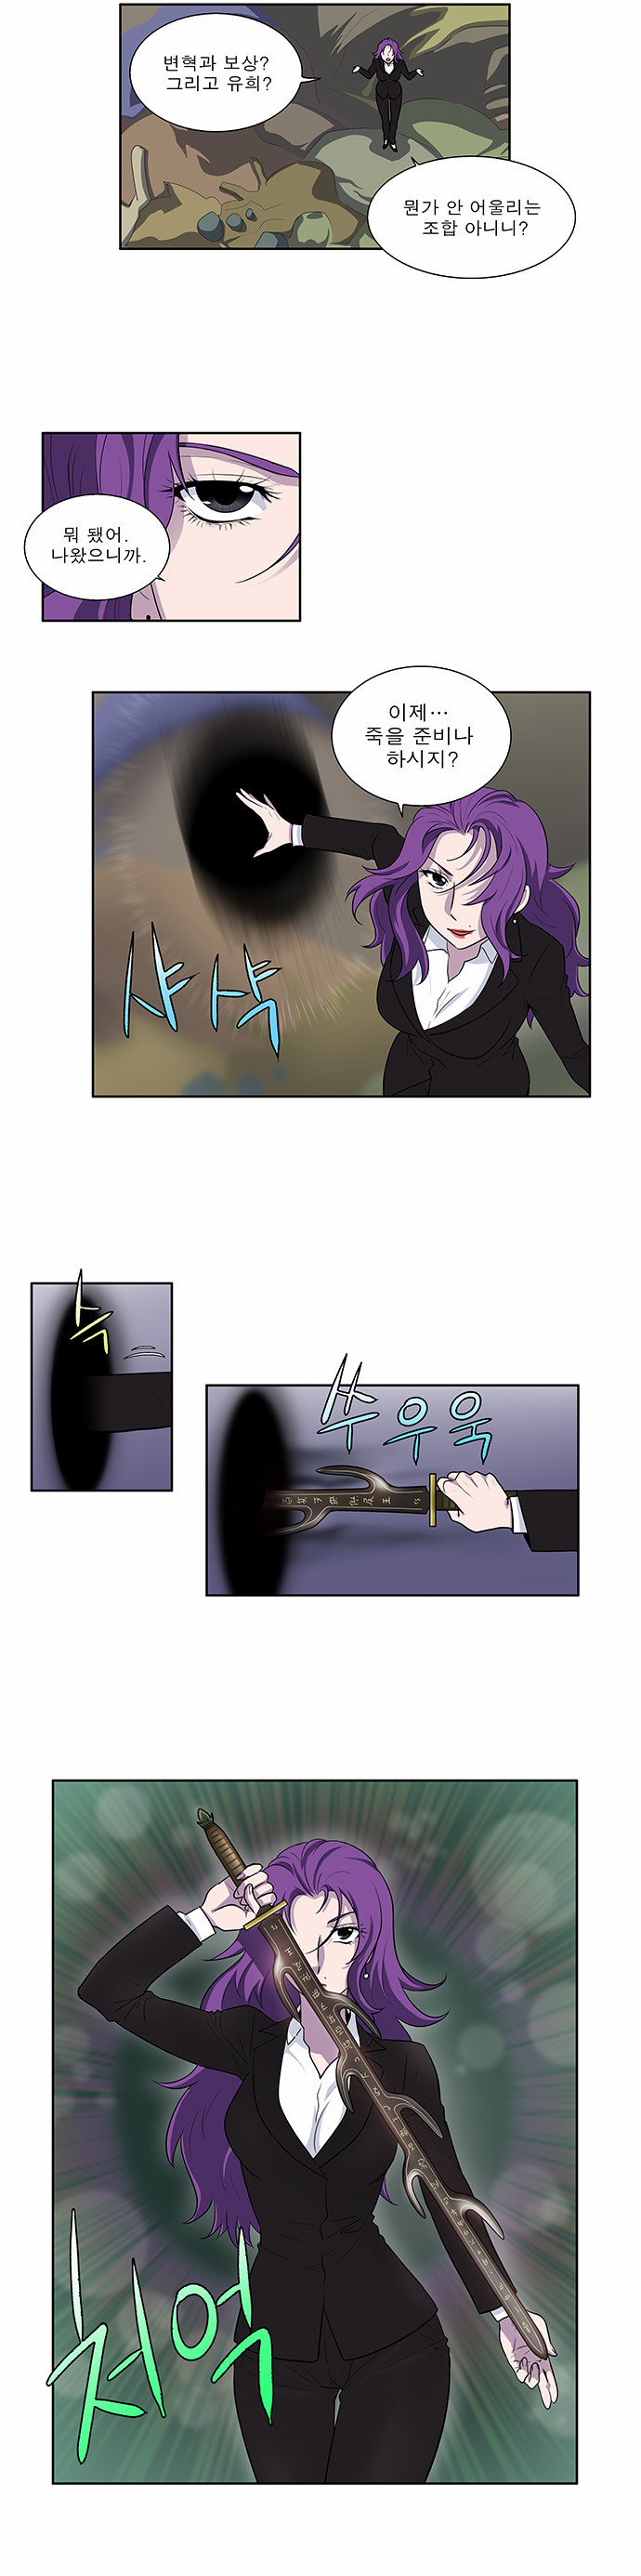 The Gamer - Chapter 153 - Page 14